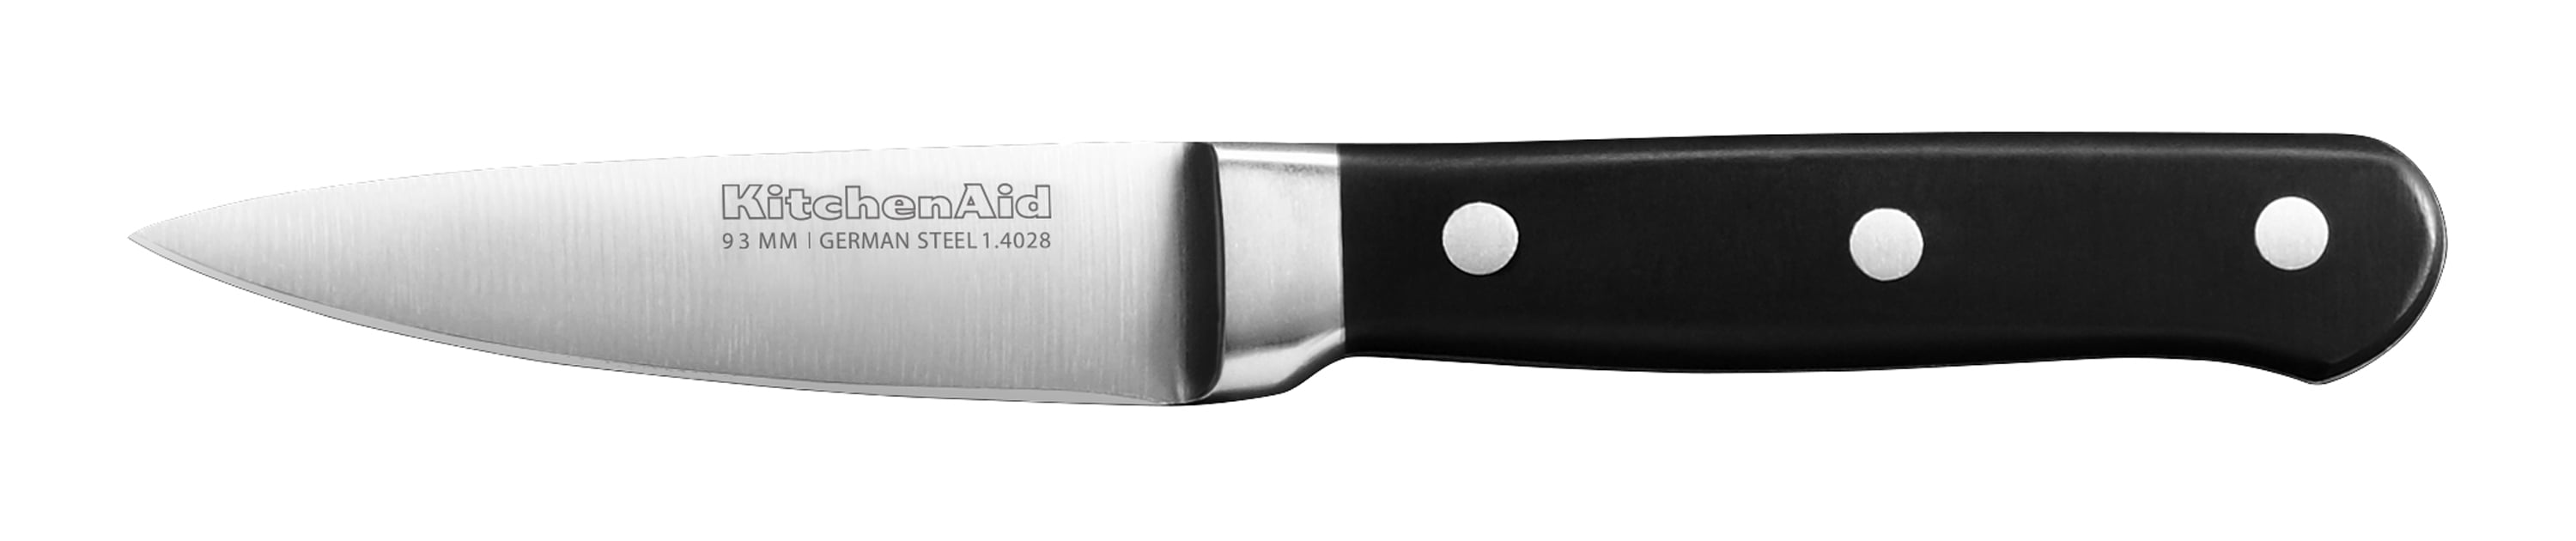 Cuisinart Triple Rivet 3.5 Paring Knife - SANE - Sewing and